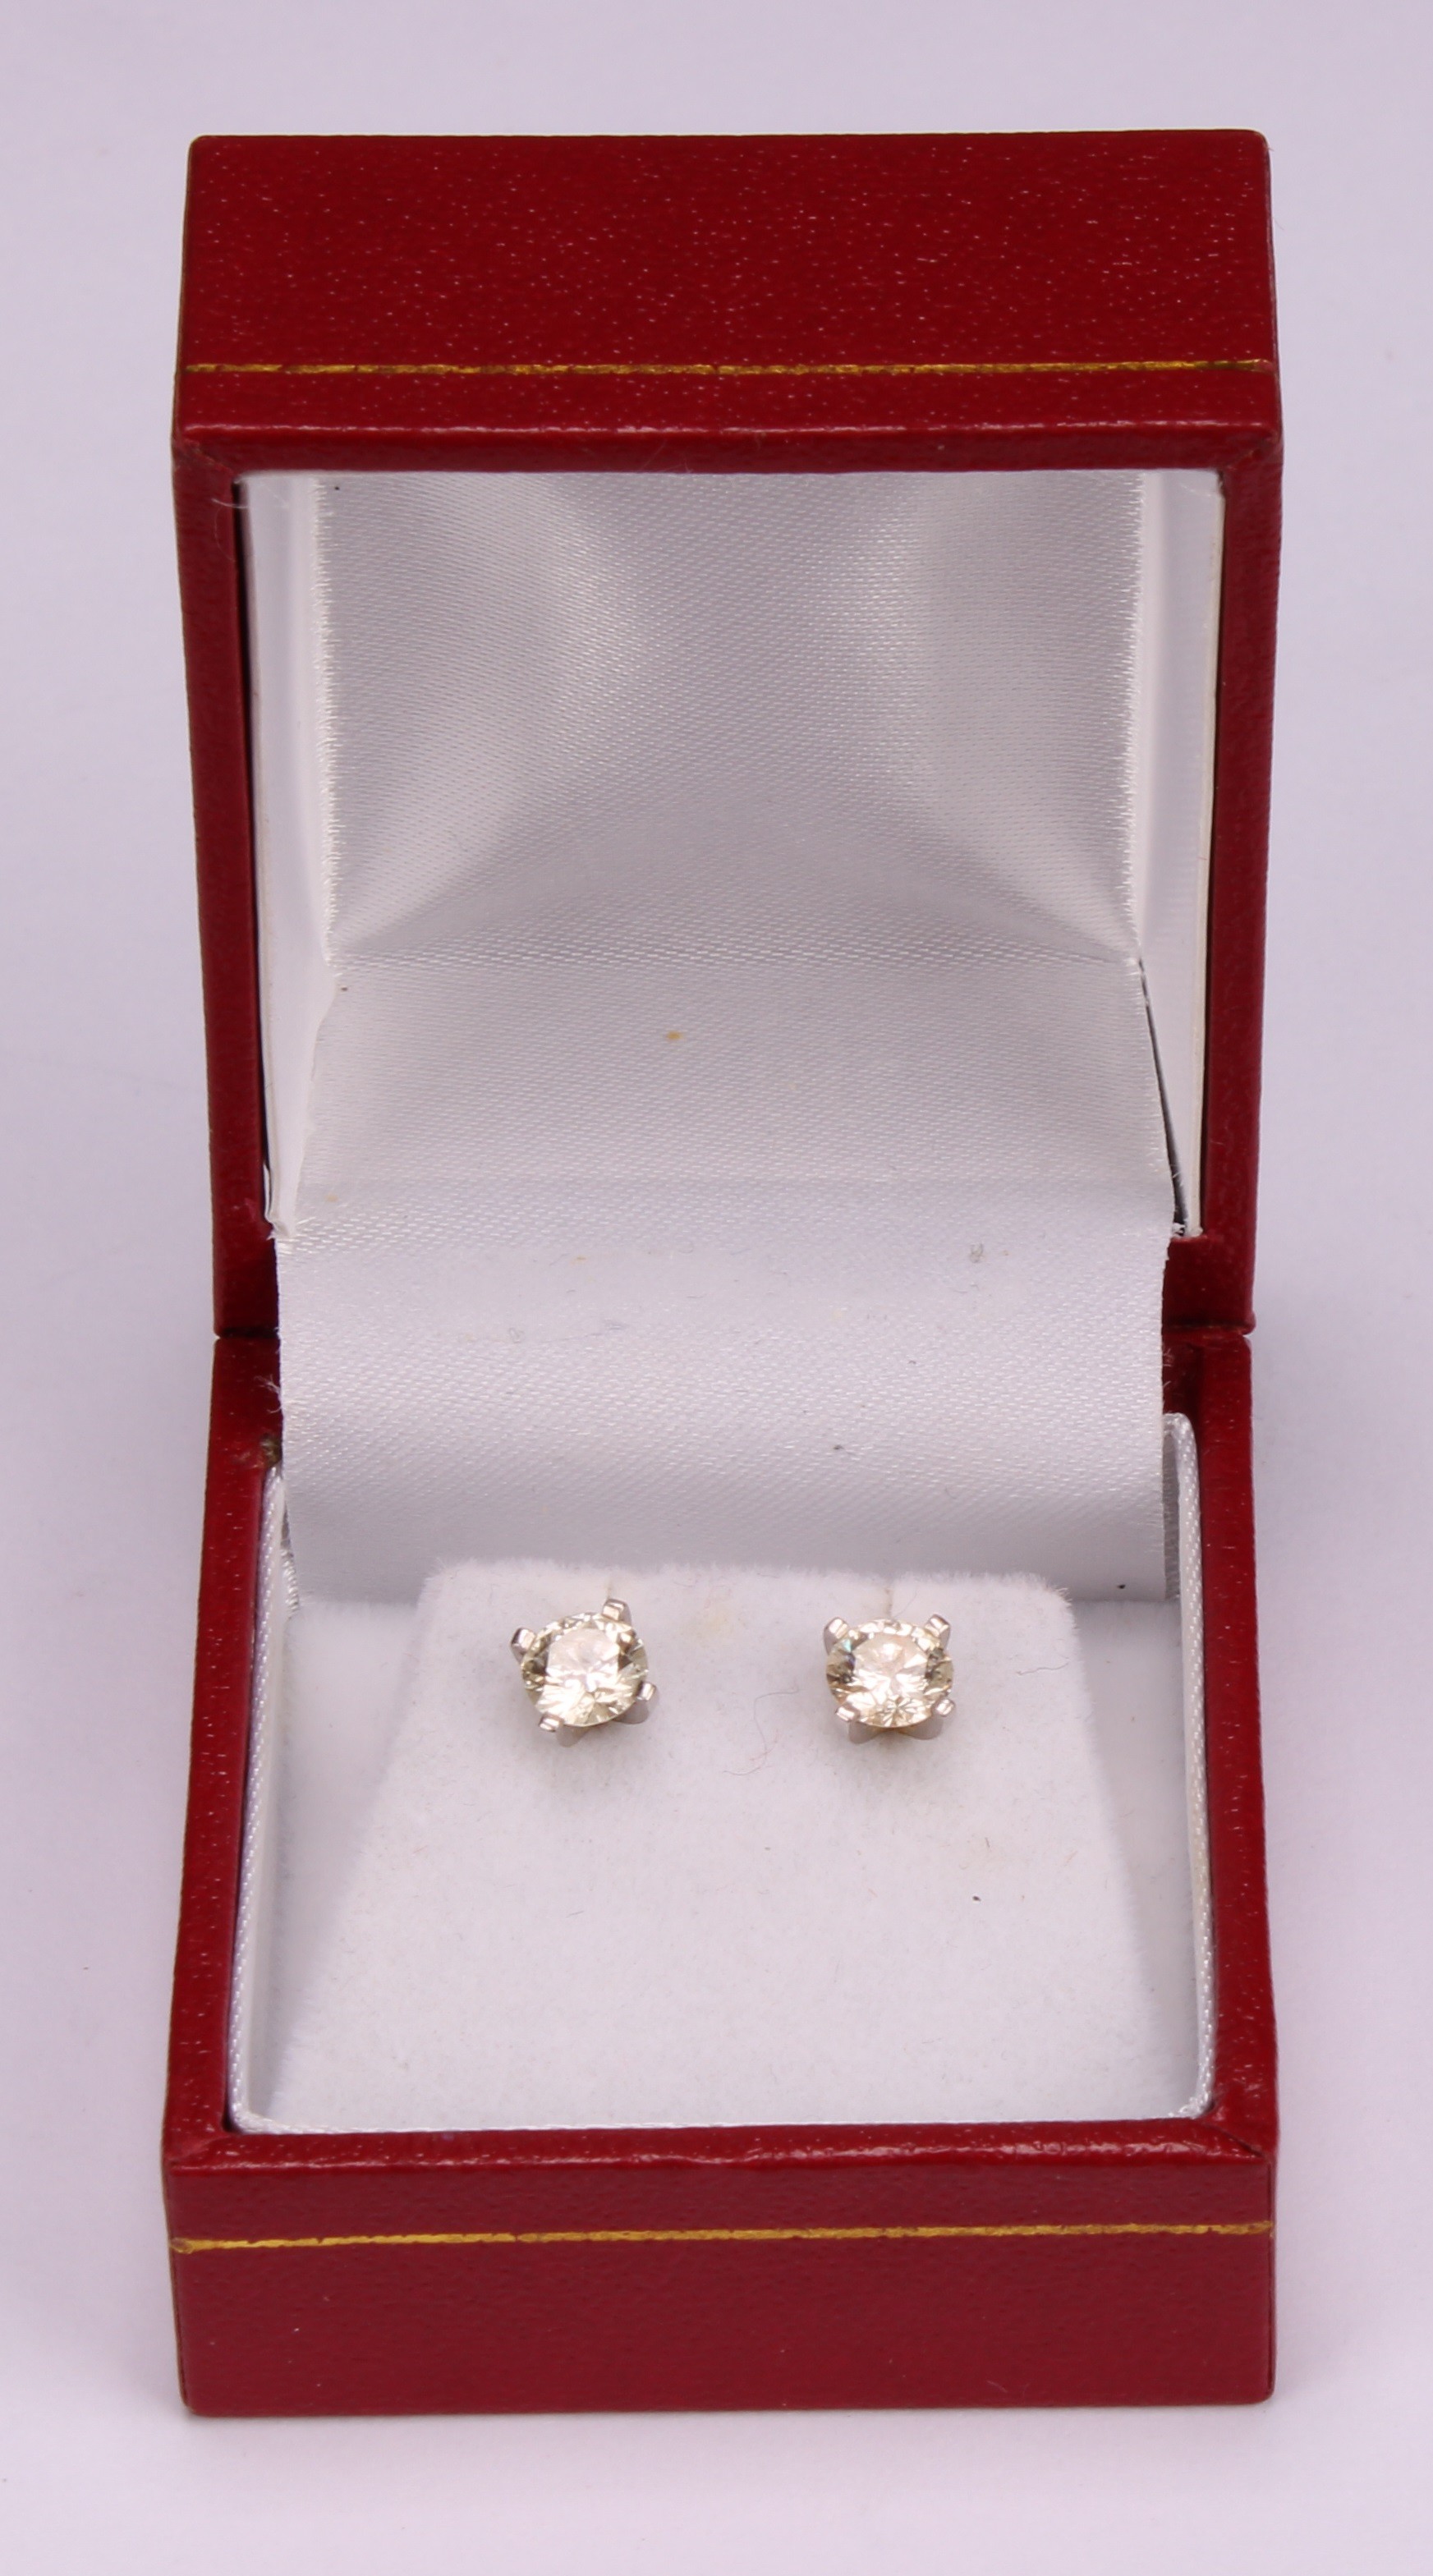 A pair of diamond stud earrings, the round brilliant cut stones claw set, platinum mounted, 1.7ct - Image 5 of 5